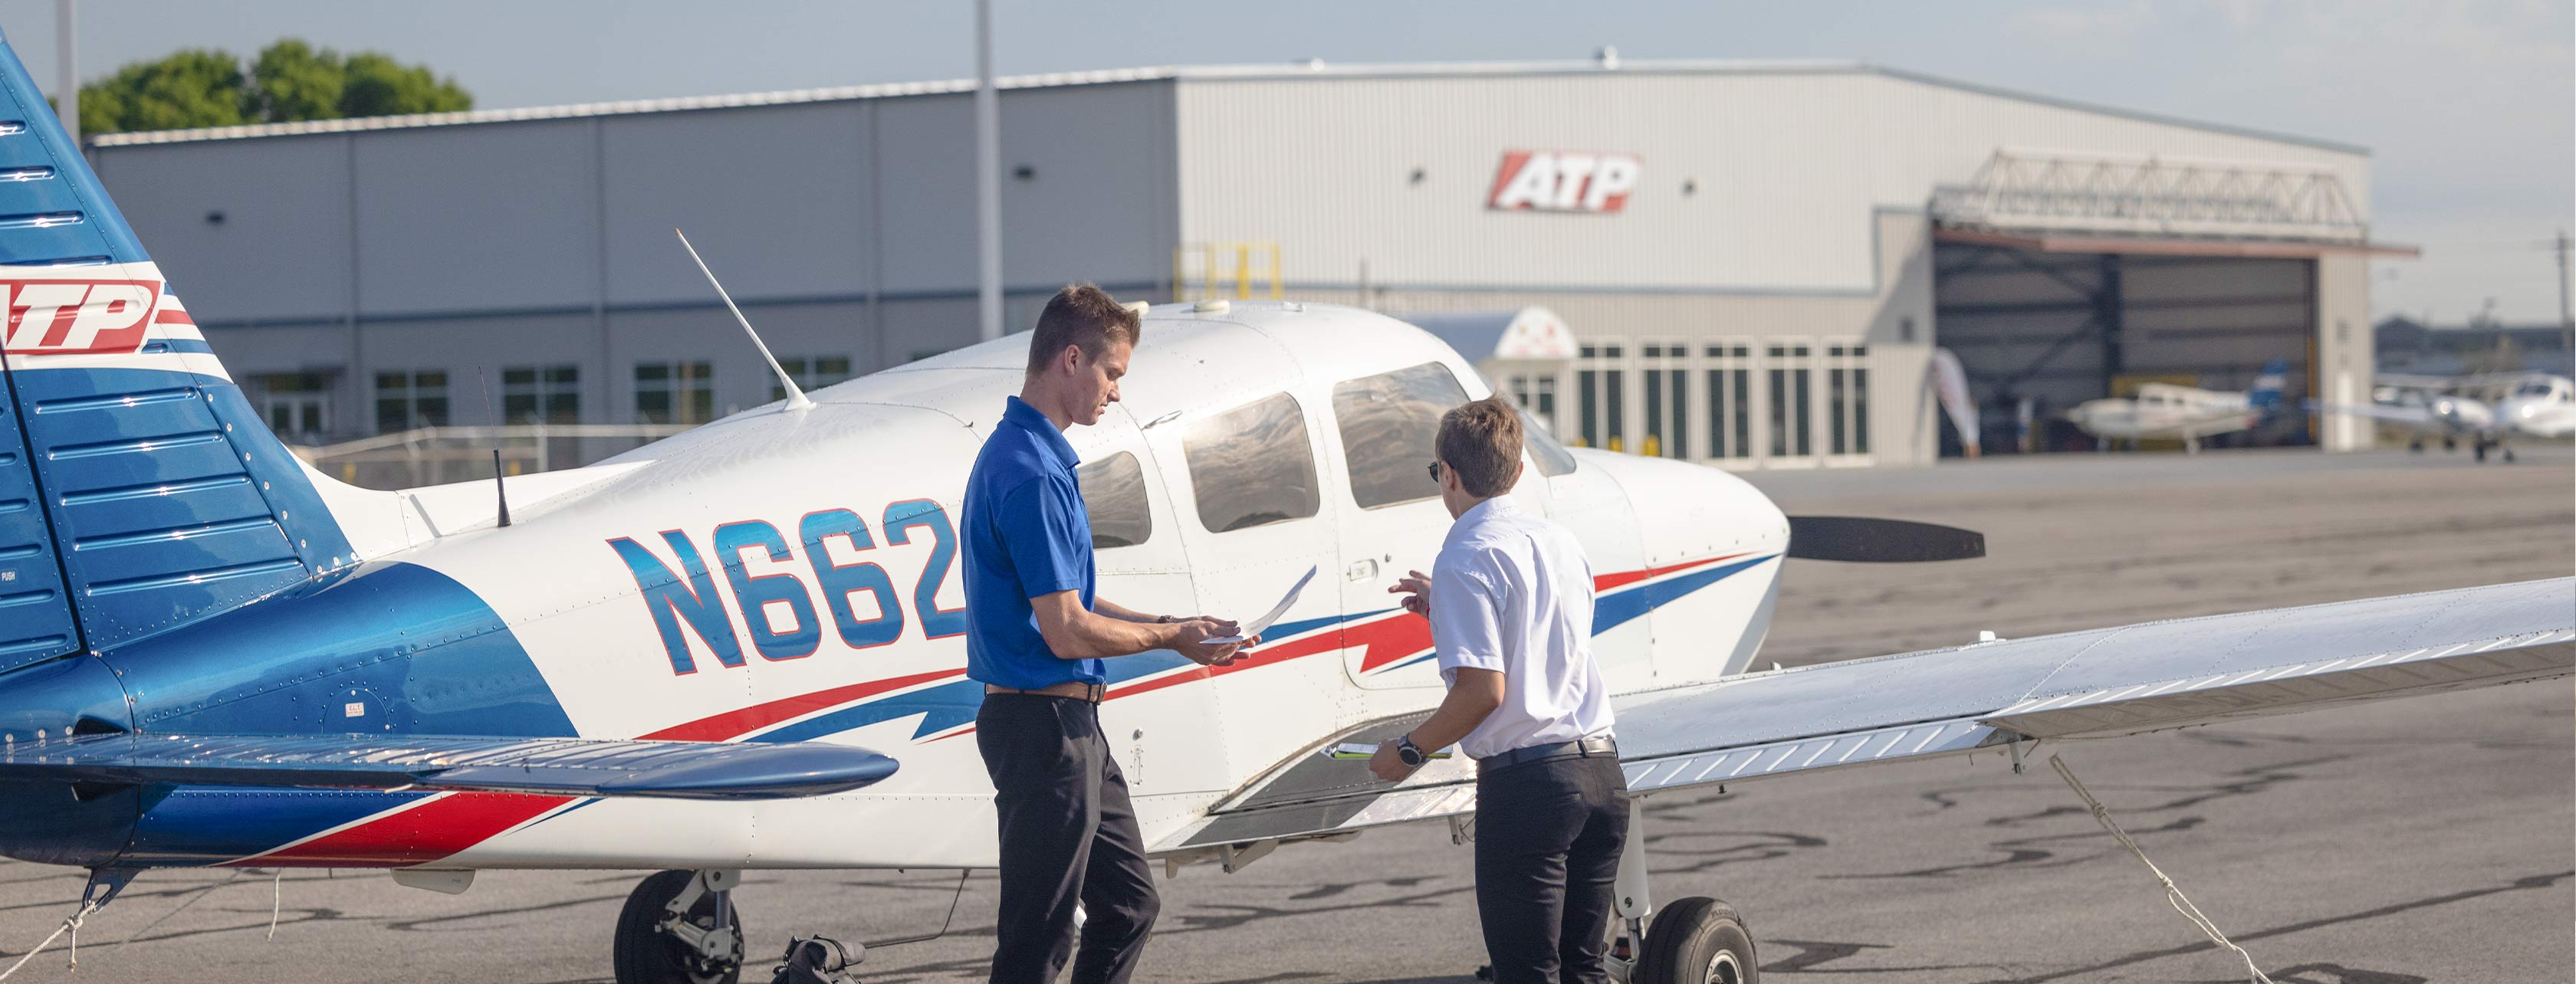 Gain your student pilot certificate at ATP Flight School with instructor sign-off